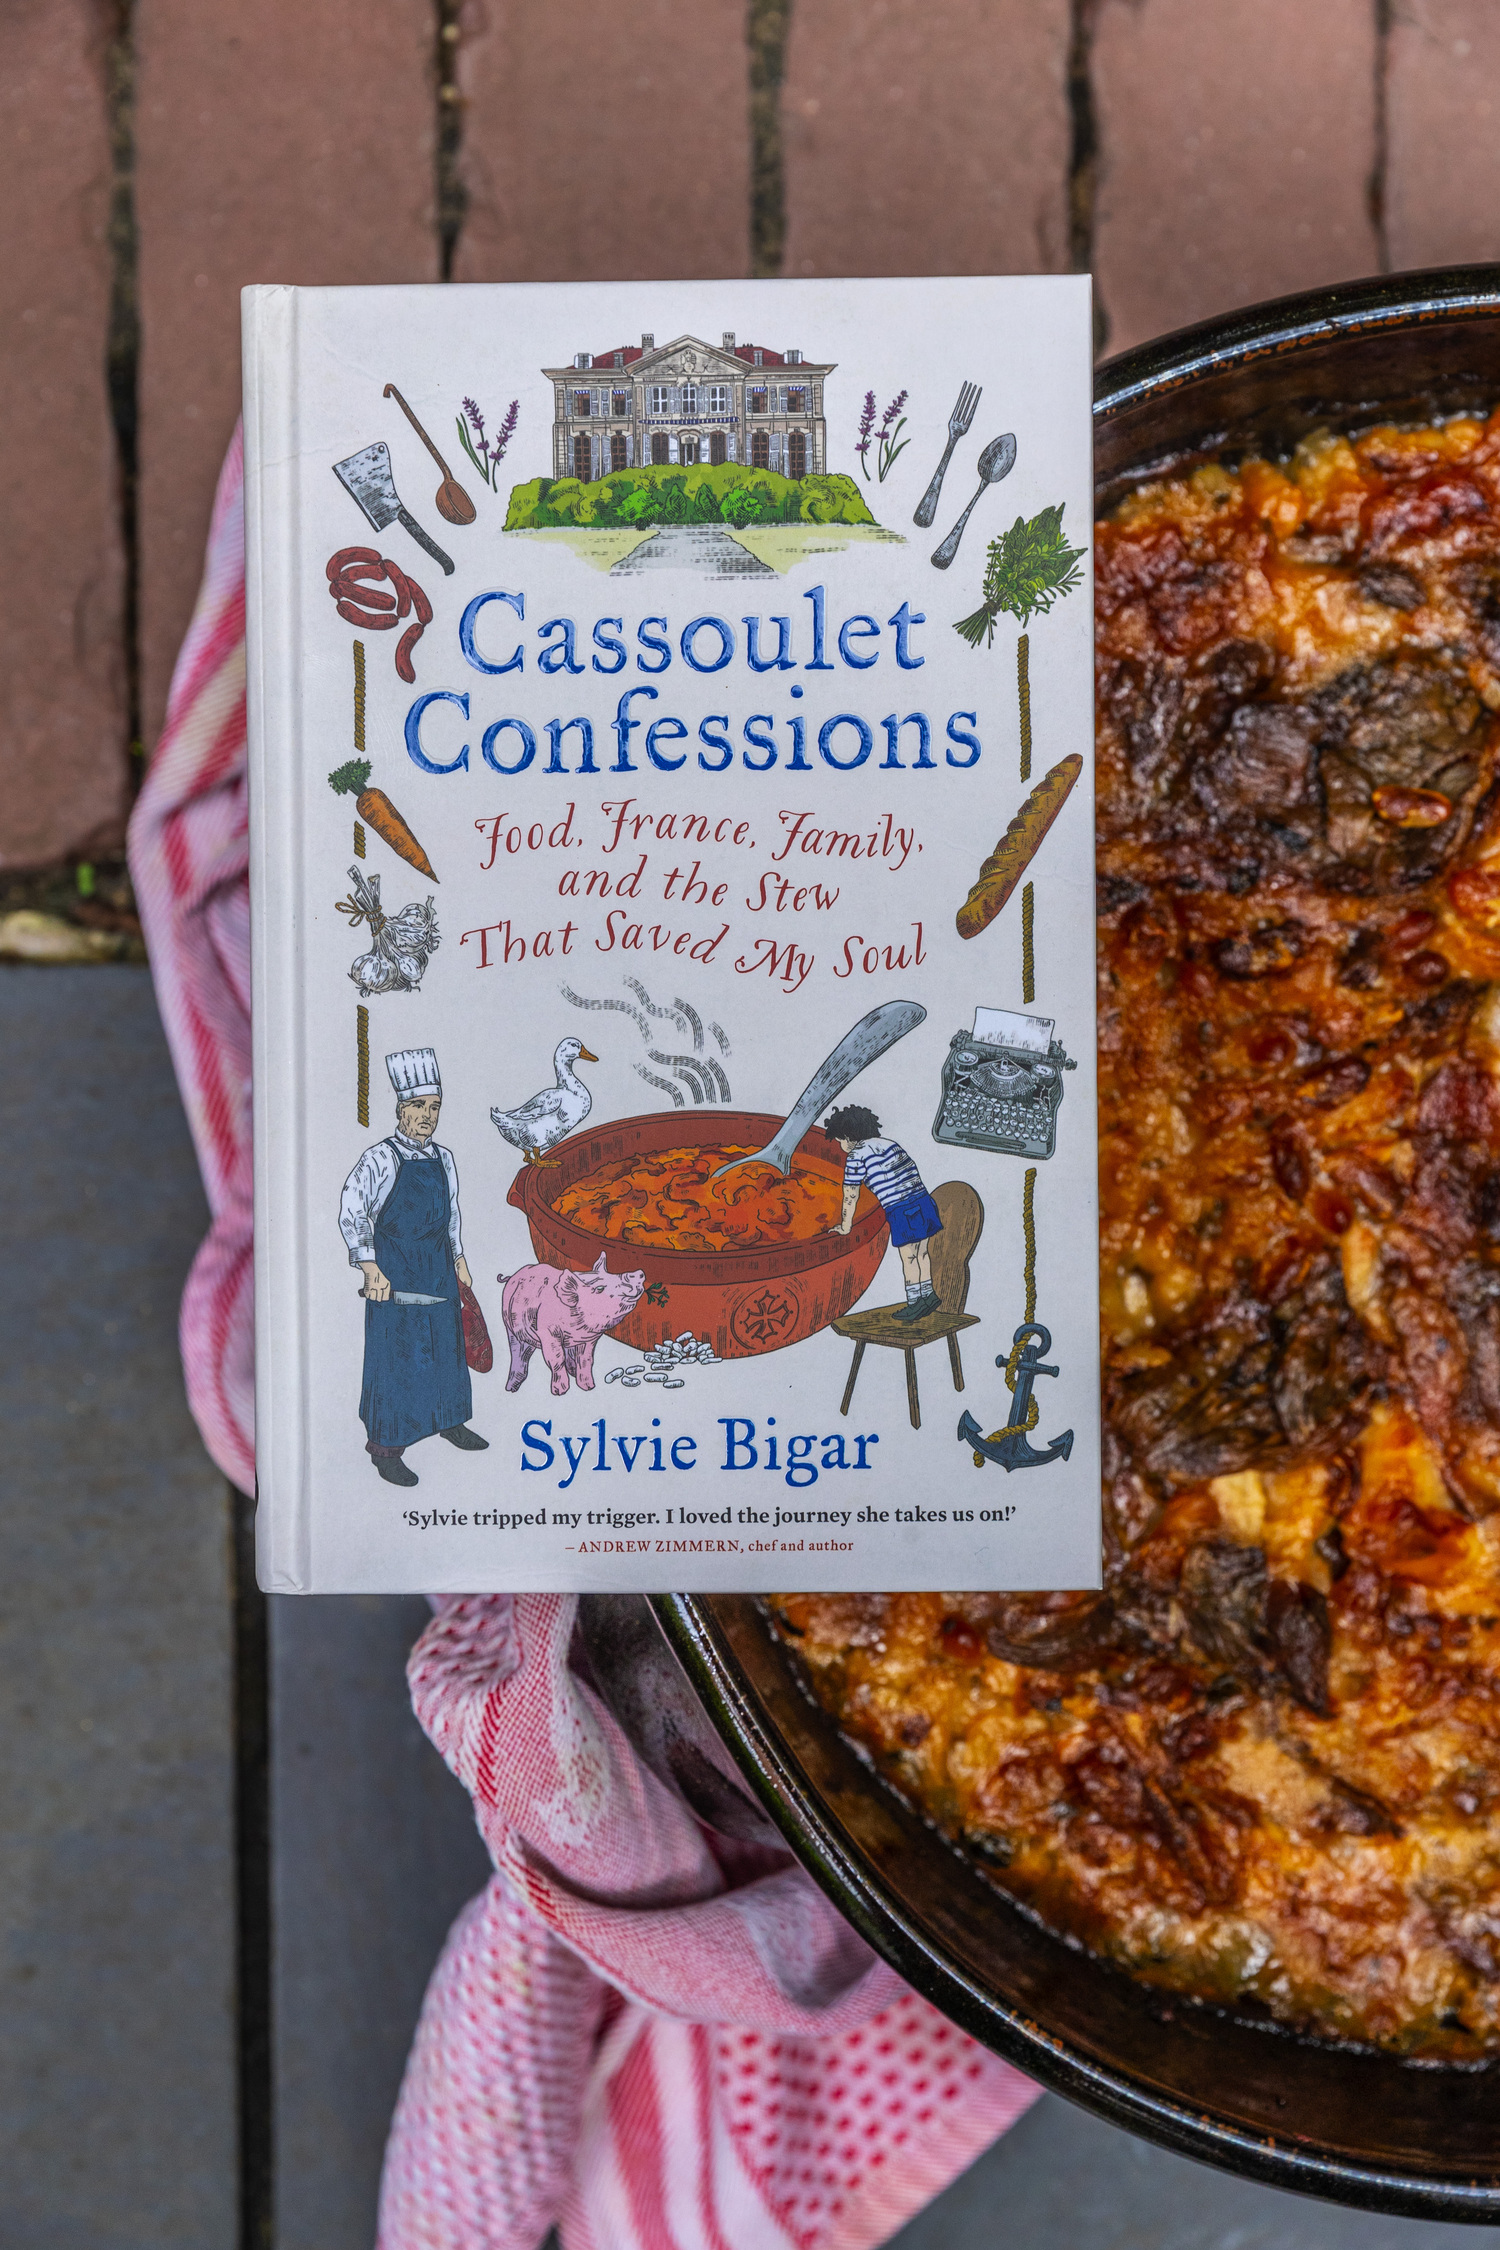 Sylvie Bigar's book “Cassoulet Confessions: Food, France, Family and the Stew That Saved My Soul